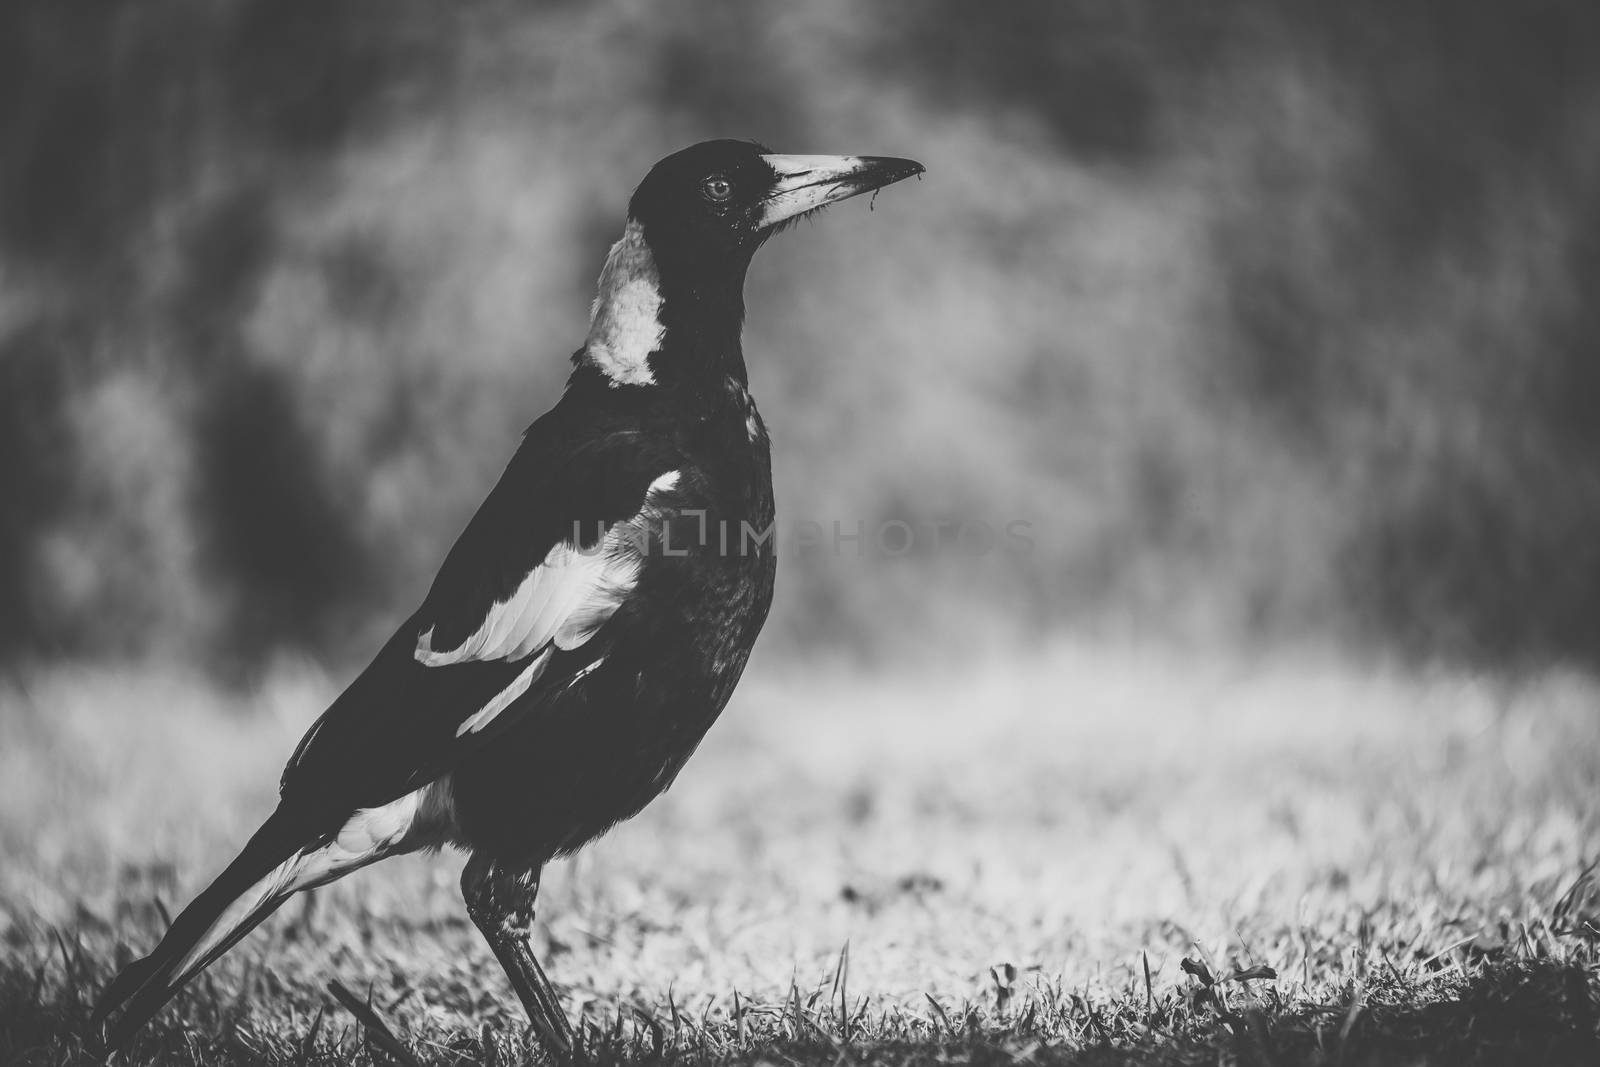 Australian magpie outside during the day time.